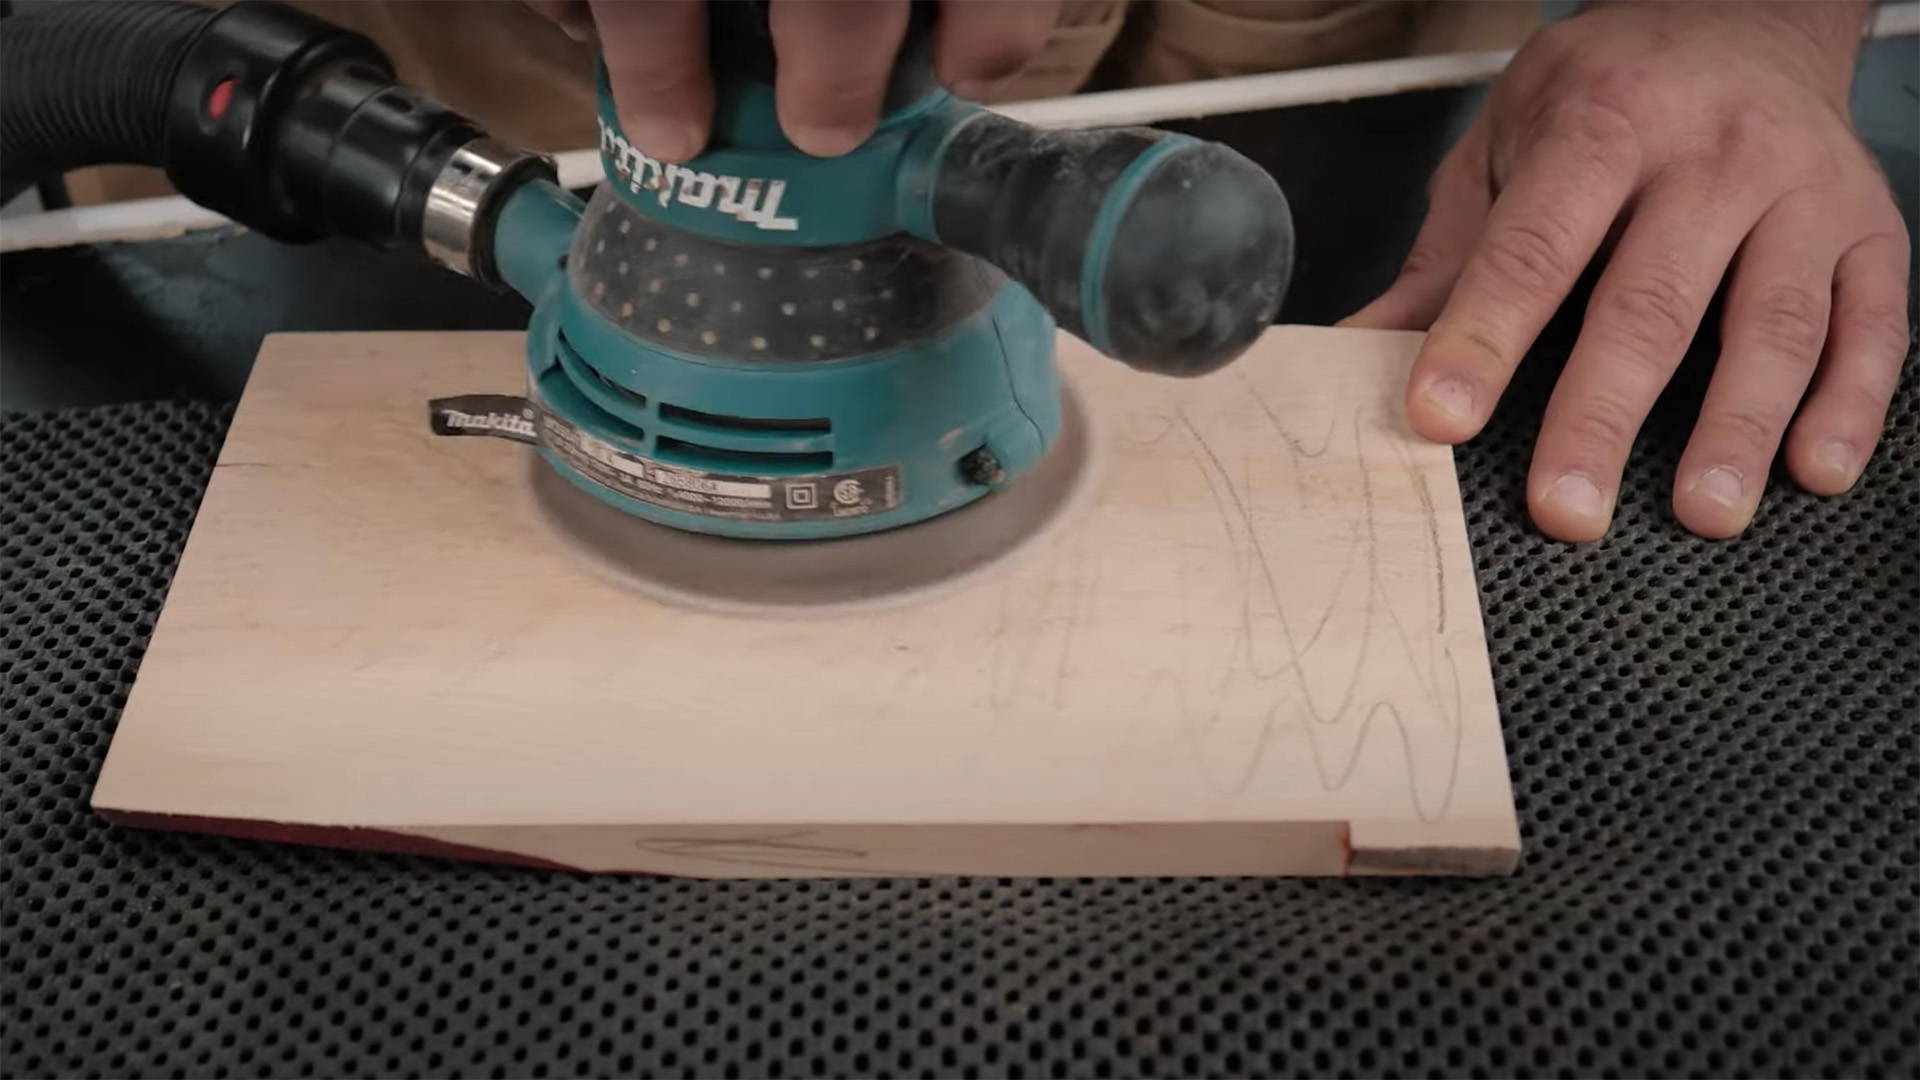 Top Things To Avoid When Sanding